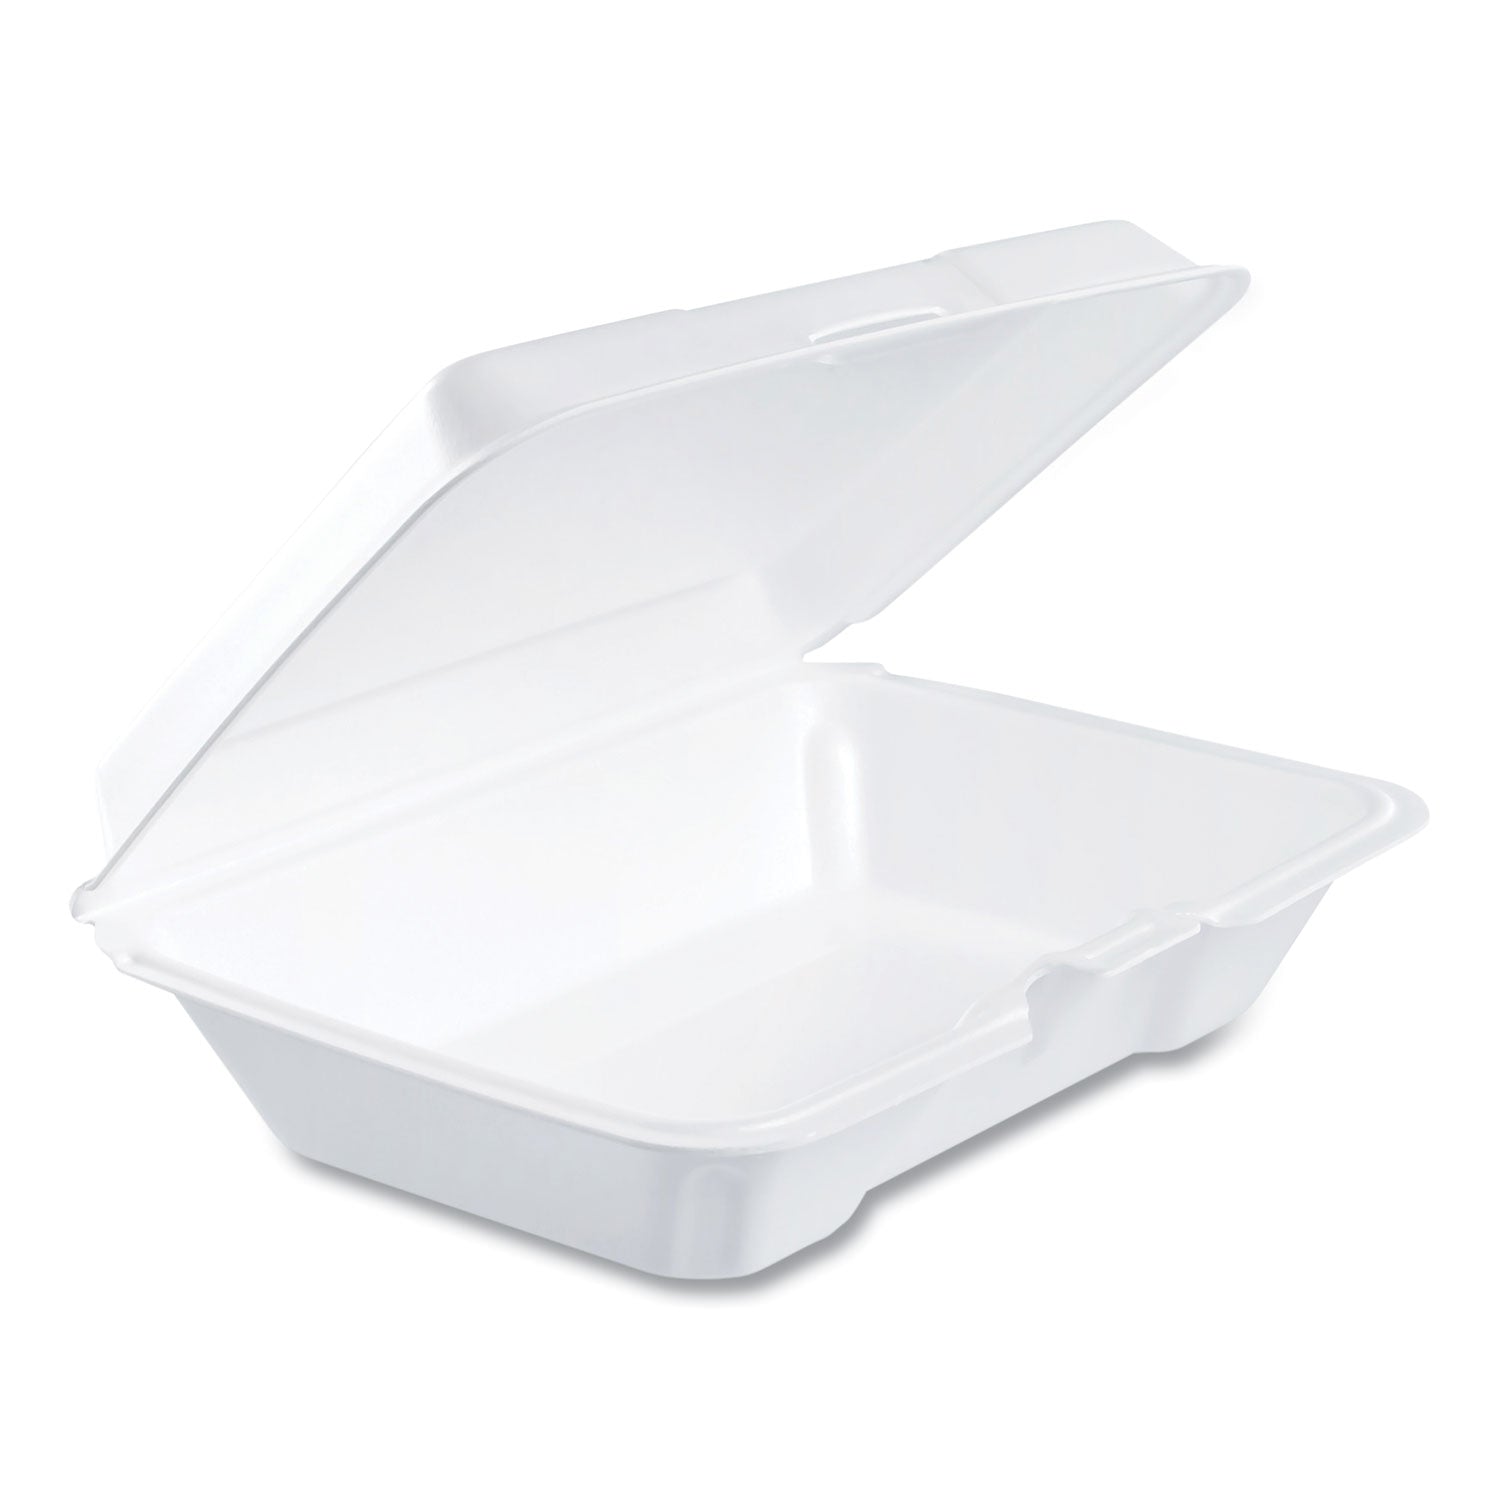 foam-hinged-lid-containers-64-x-93-x-26-white-200-carton_dcc206ht1r - 1